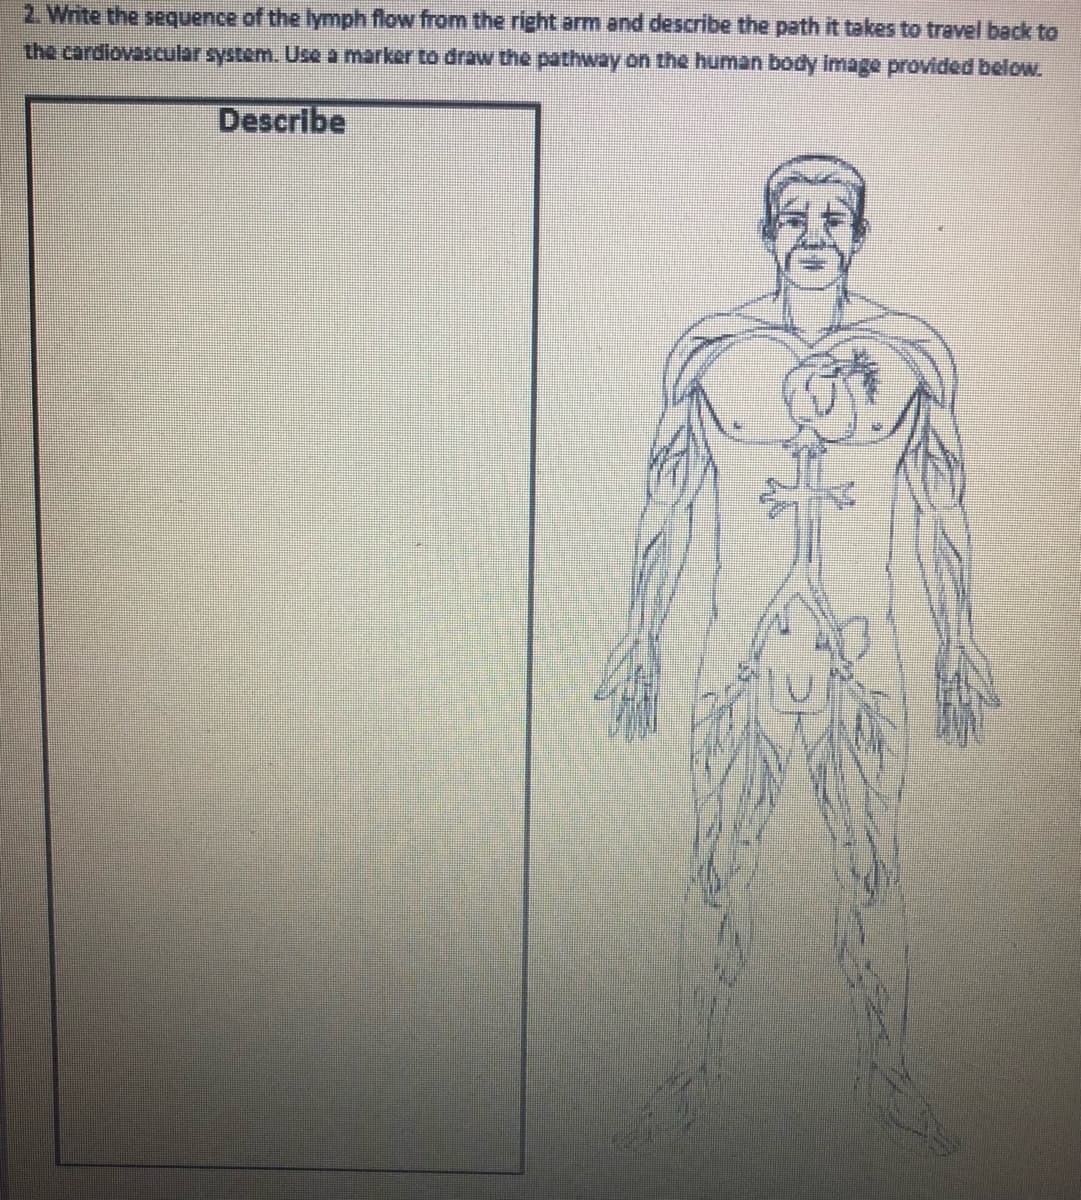 2. Write the sequence of the lymph flow from the right arm and describe the path it takes to travel back to
the cardiovascular system. Use a marker to draw the pathway on the human body image provided below.
Describe
